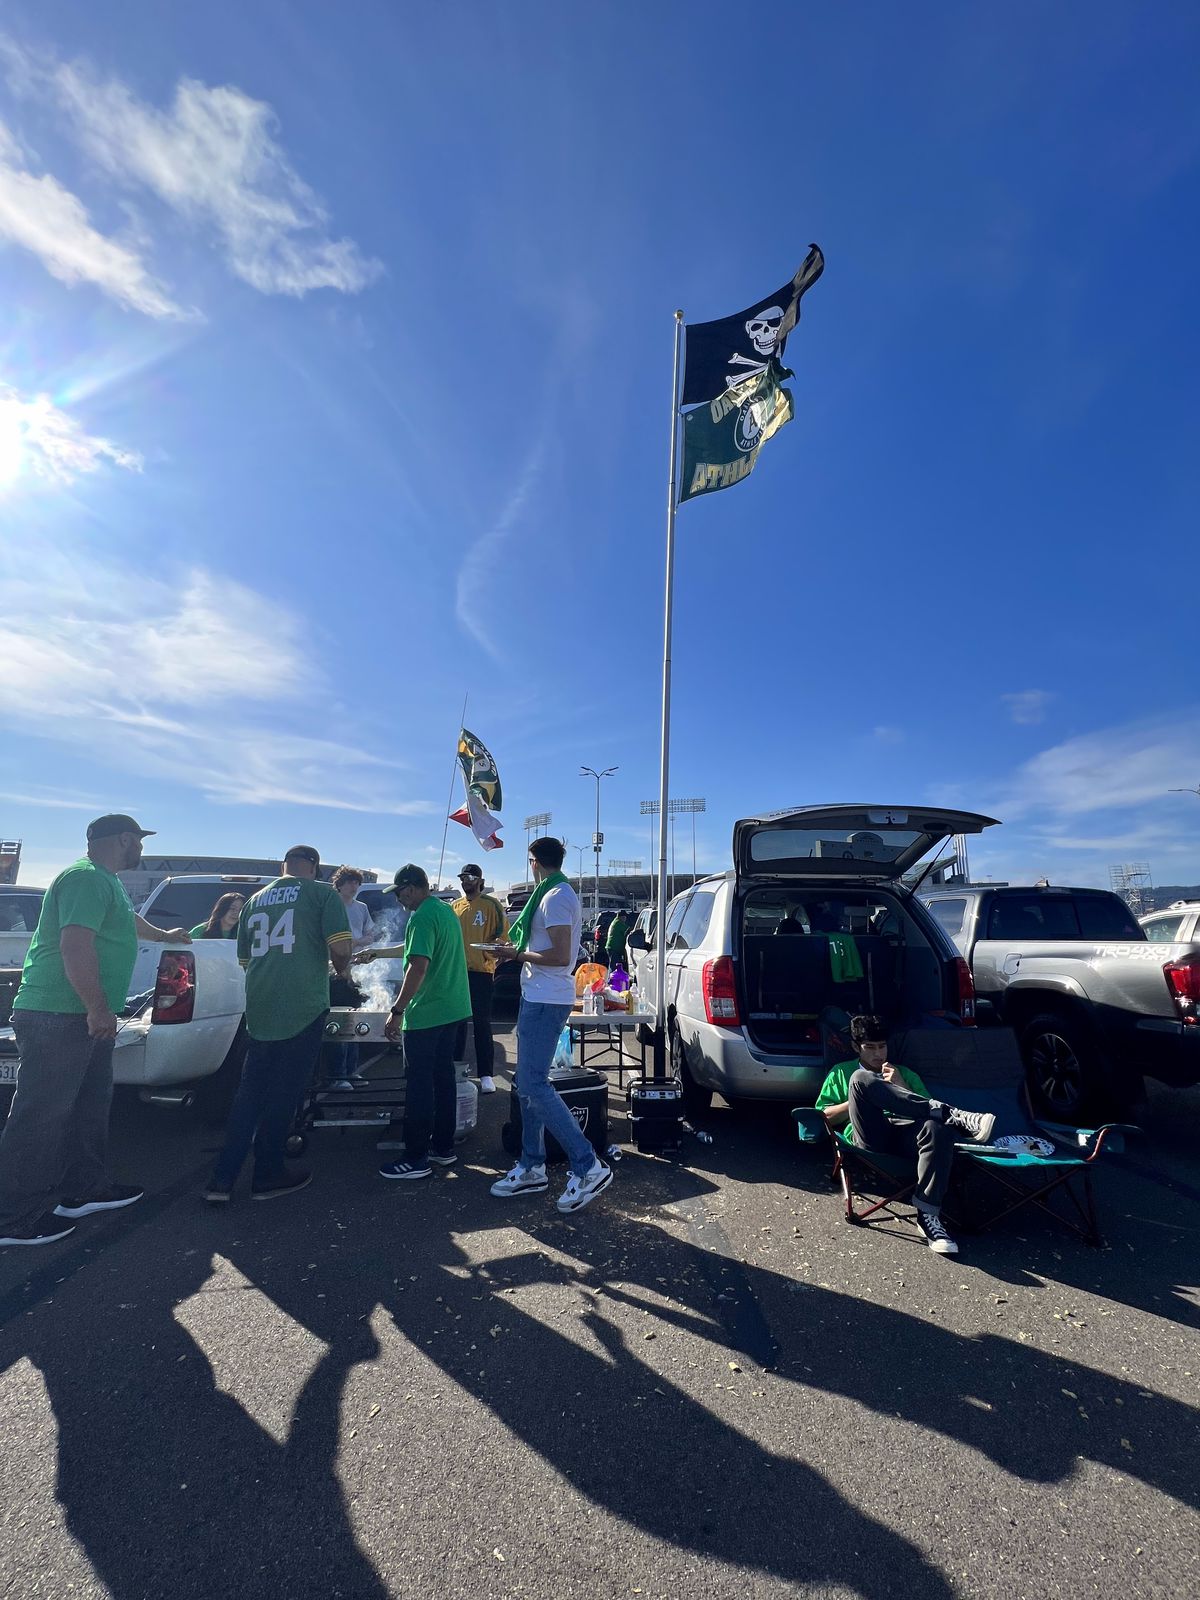 A tailgate setup including flags for the Oakland Raiders and A’s.